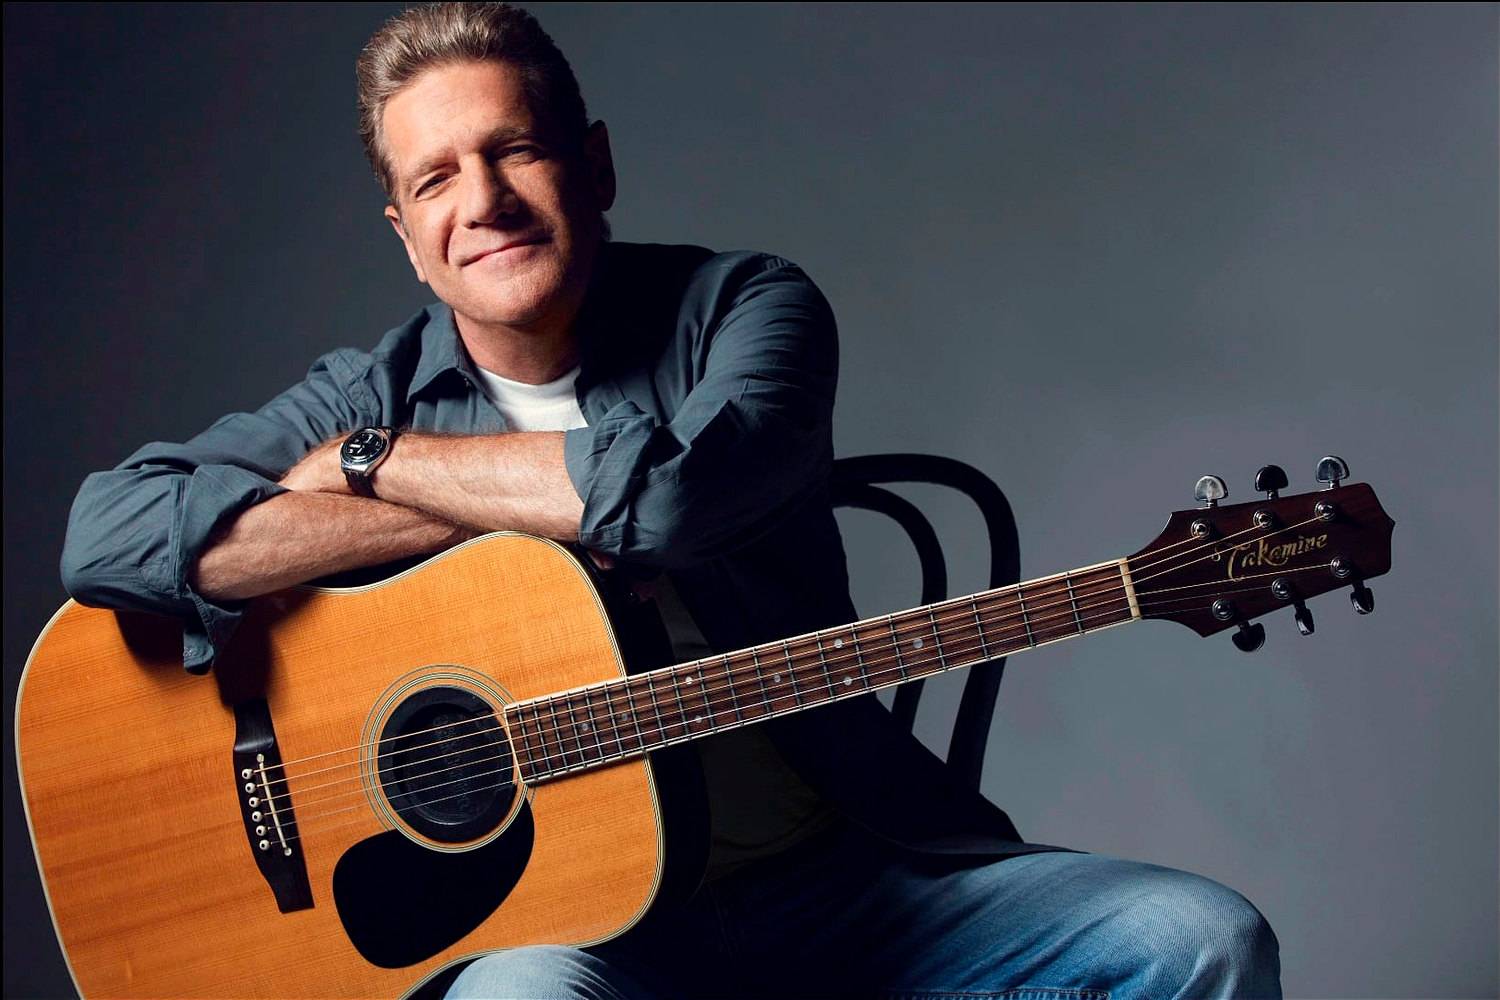 Remembering Eagles guitarist Glenn Frey - The Globe and Mail